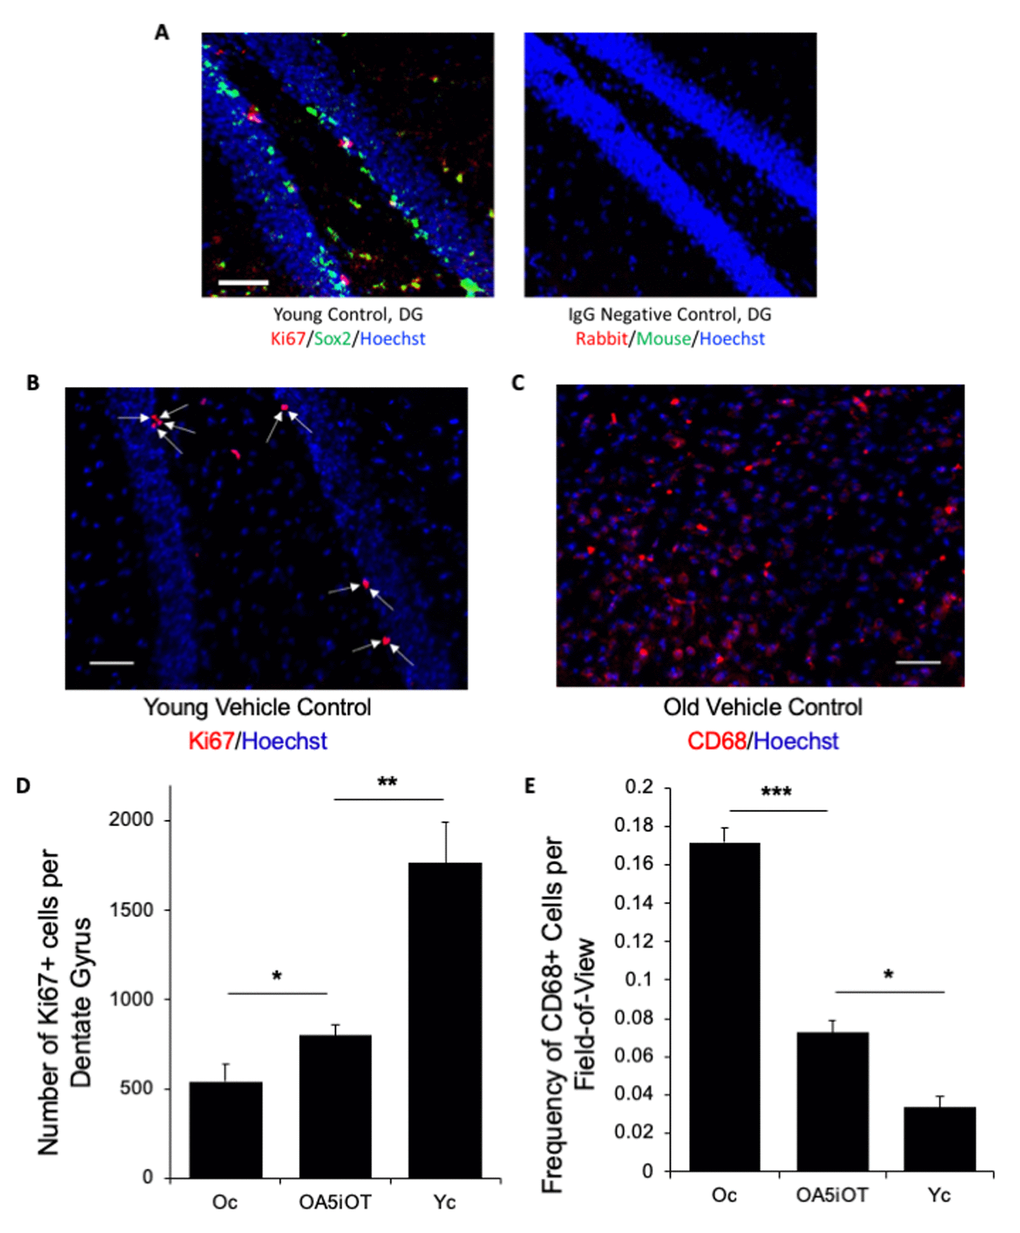 Alk5i+OT treatment improves hippocampal neurogenesis and attenuates inflammation in the brains of old mice. (A) Immunofluorescence was performed on serial 25-micron brain sections with anti-Ki67 (proliferation marker) and anti-Sox-2 (neural stem cell marker), using Hoechst to stain all nuclei. A representative image of ki67 (red)/Sox2 (green)/Hoechst (blue) triple positive cells in the hippocampal Dentate Gyrus of a young control animal treated with HBSS for 7 consecutive days is shown. Scale bar=50 µm. Isotype-matched IgG negative controls exhibited minimal background fluorescence. (B) Immunofluorescence was performed on serial 25-micron brain sections with anti-Ki67 (proliferation marker), using Hoechst to stain all nuclei, imaging the cells in the SGZ of the hippocampal Dentate Gyrus. Representative images of Ki67 (red)//Hoechst (blue) positive cells in the hippocampal Dentate Gyrus. Arrows point to these double-positive cells. Scale bar=50 µm. (C) Immunofluorescence was performed on serial 25-micron brain sections with anti-CD68 (monocyte/microglia marker), using Hoechst to stain all nuclei. Representative images of CD68 (red)/Hoechst (blue) double positive cells. Scale bar=50 µm. (D) The numbers of Ki67+/Hoechst+ cells in the SGZ of DG were quantified through entire hippocampi of each cohort and were found to decline with age as expected, and to increase in the Alk5i+OT old cohort, as compared to the control vehicle-treated old cohort. Young control (Yc n=5), old control (Oc n=5), Alk5i+OT (OA5iOT n=6) *p Oc & OA5iOT = 0.043, **p Yc & OA5iOT = 0.00159, mean and SE are shown. (E) The number of CD68+ brain cells were quantified in all cohorts and were found to increase with age and to decline in Alk5i+OT-treated old muscle, as compared to the vehicle-treated old control. N young control (Yc n=5), old control (Oc n=5), Alk5i+OT (OA5iOT n=6). ***p